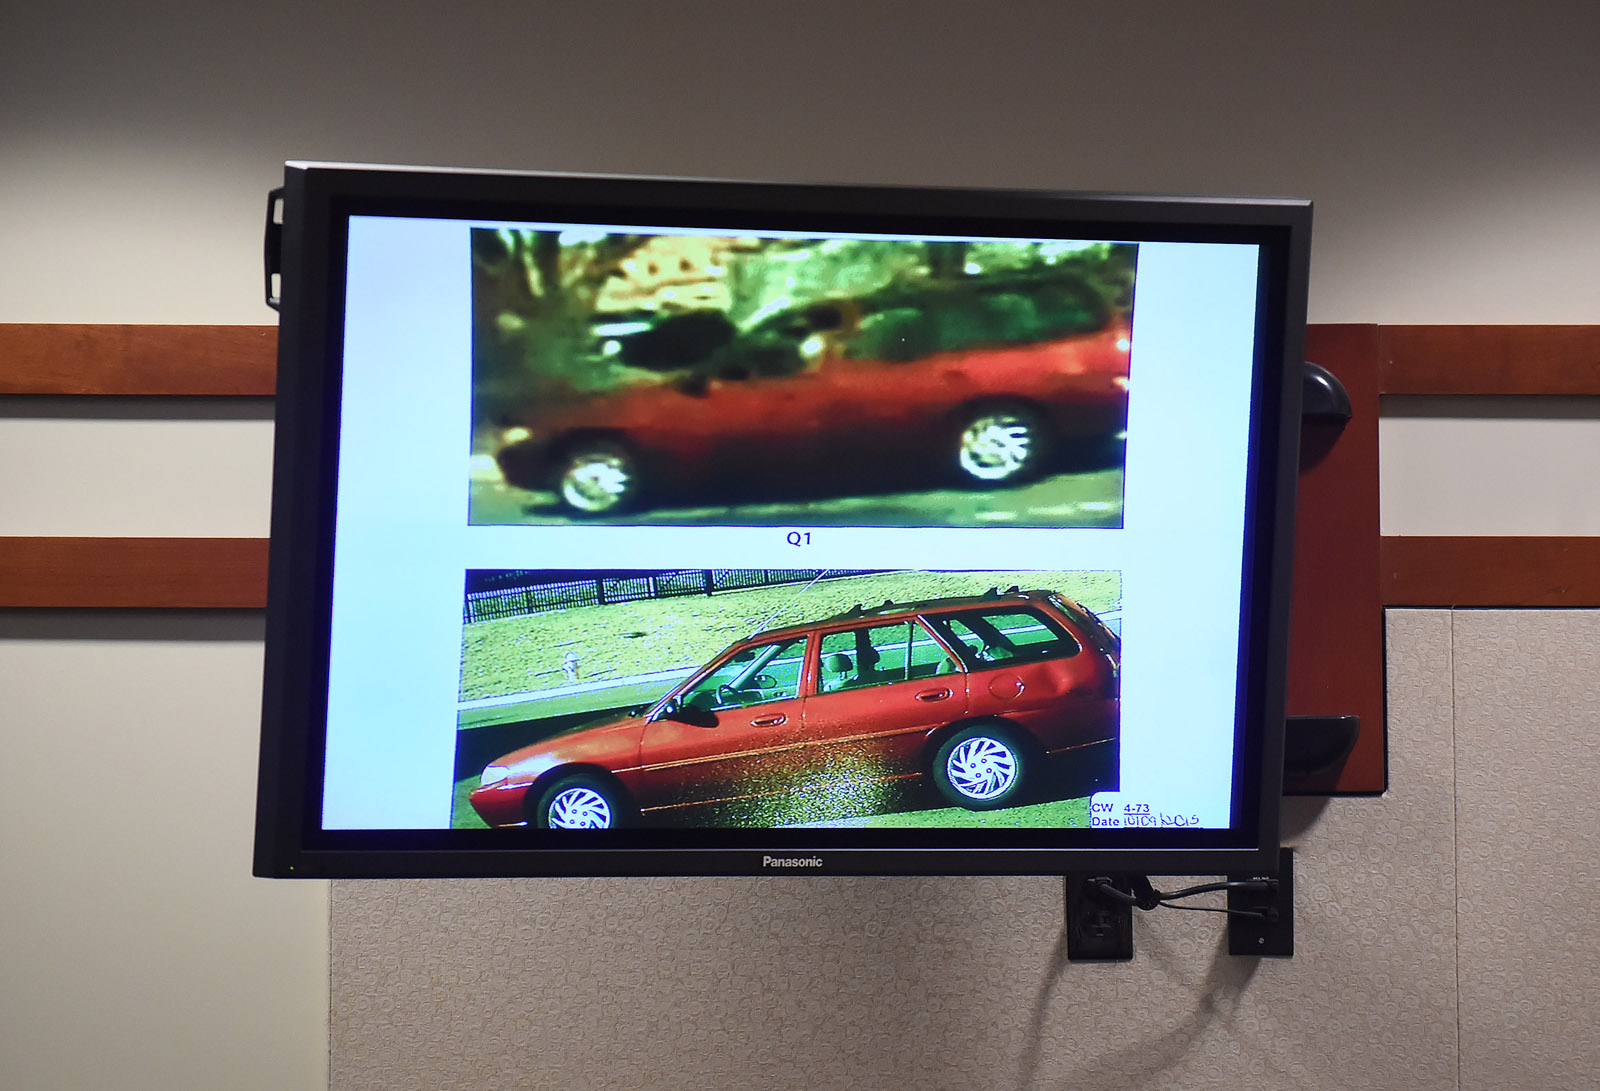 A photograph of Charles Severance's vehicle, bottom is shown along with a still photograph from a surveillance video, top, during Severance's trial in Fairfax County Circuit Court on Tuesday October 13, 2015 in Fairfax, VA. Severance is accused of three murders over the course of a decade in Alexandria, VA. (Pool Photo by Matt McClain/ The Washington Post)